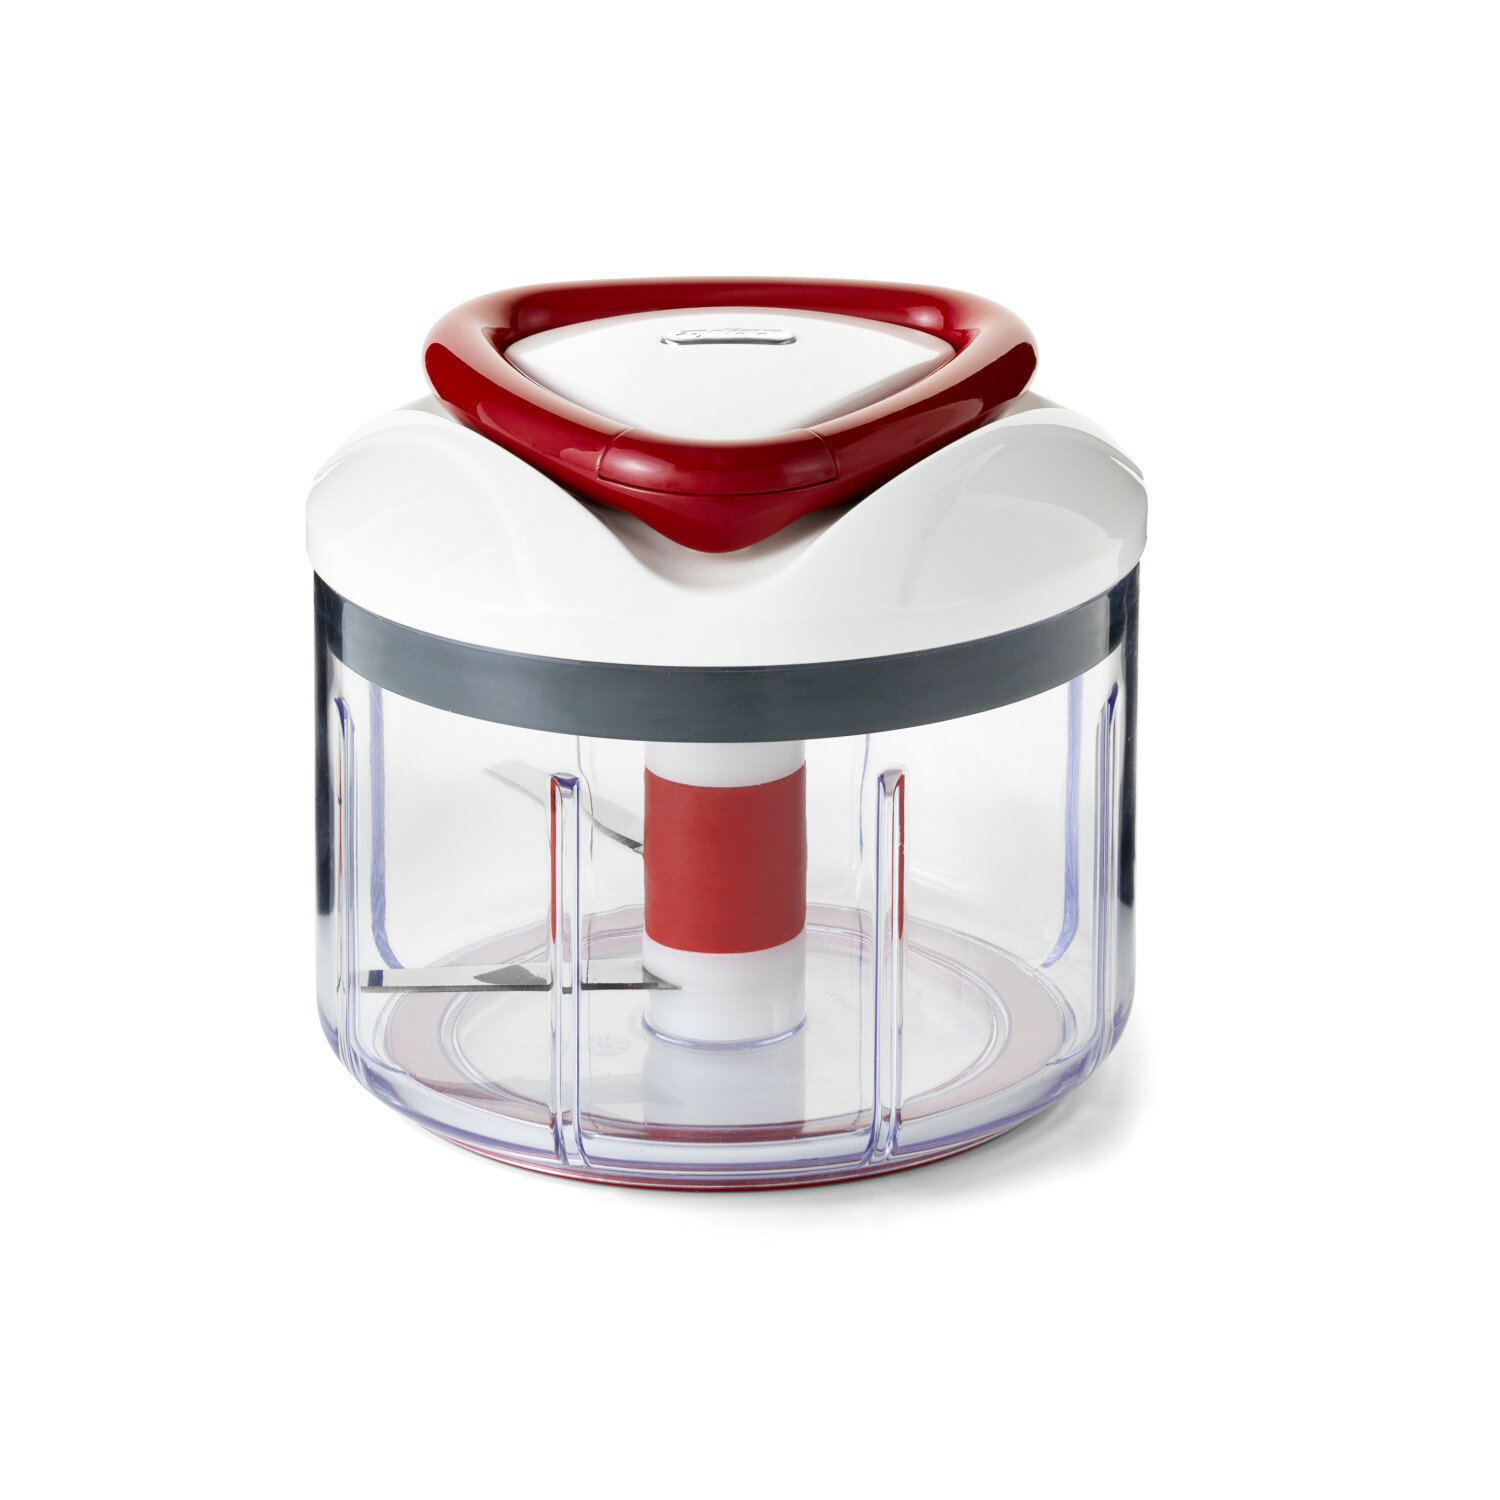 Zyliss Easy Pull Manual Food Processor and Chopper  Reviews Wayfair